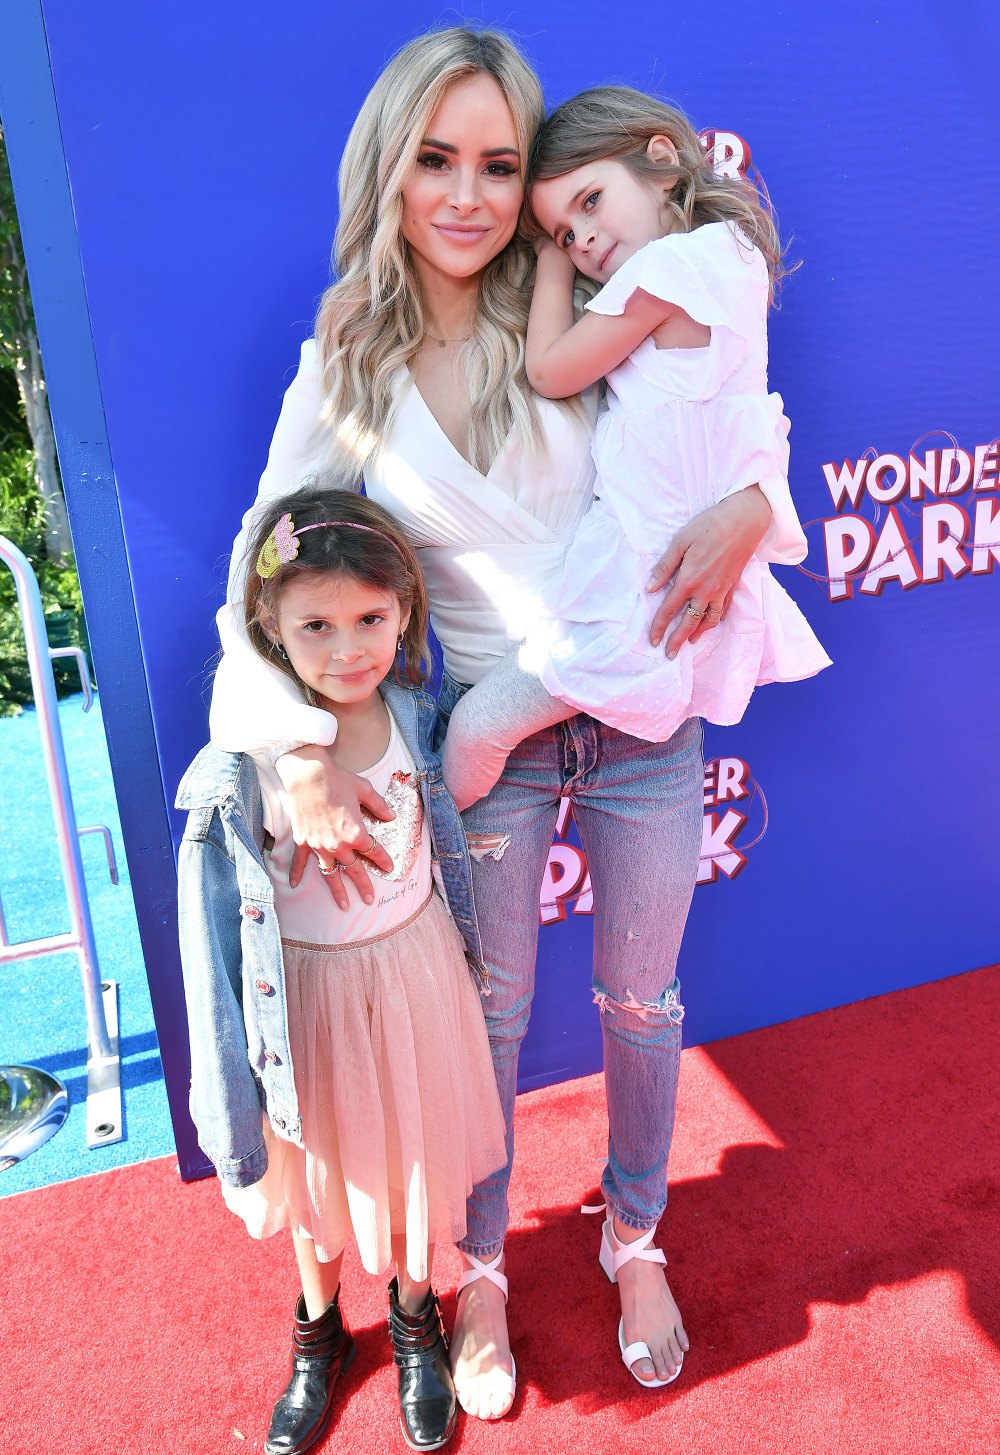 Amanda Stanton Reveals She Doesn’t ‘Coparent Well’ With Daughters’ Dad: ‘It’s OK to Be Honest’